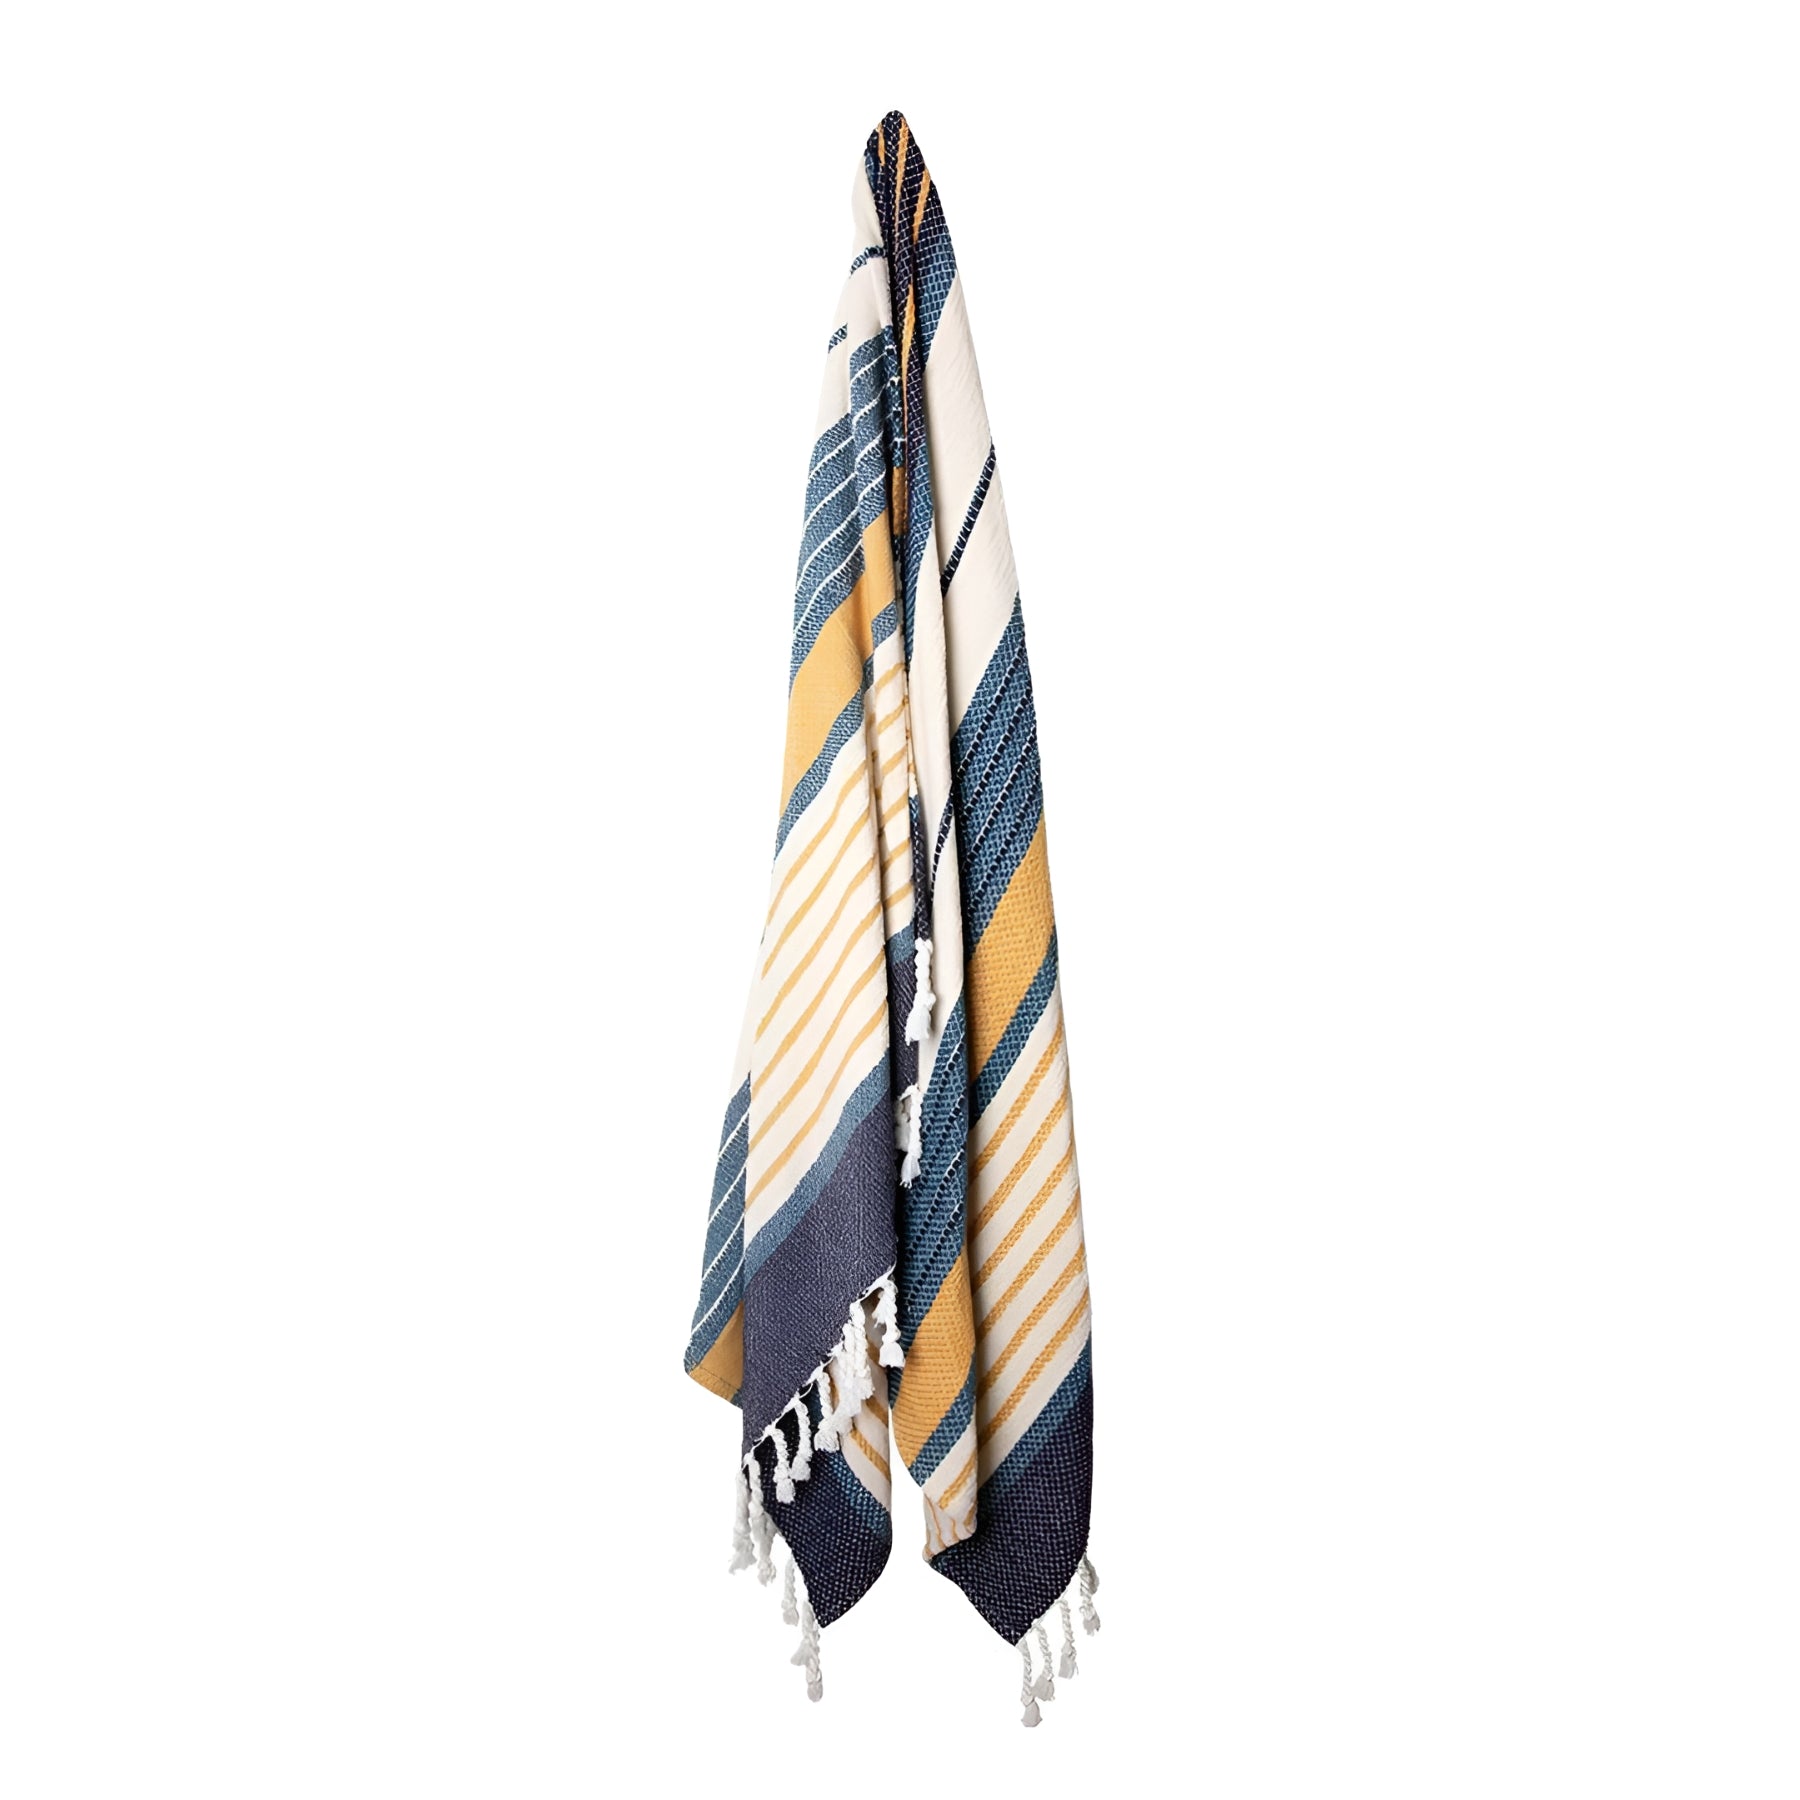 Zephyr throw rug in Blue Hues with navy, mustard, and white stripes and white tassels, draped elegantly